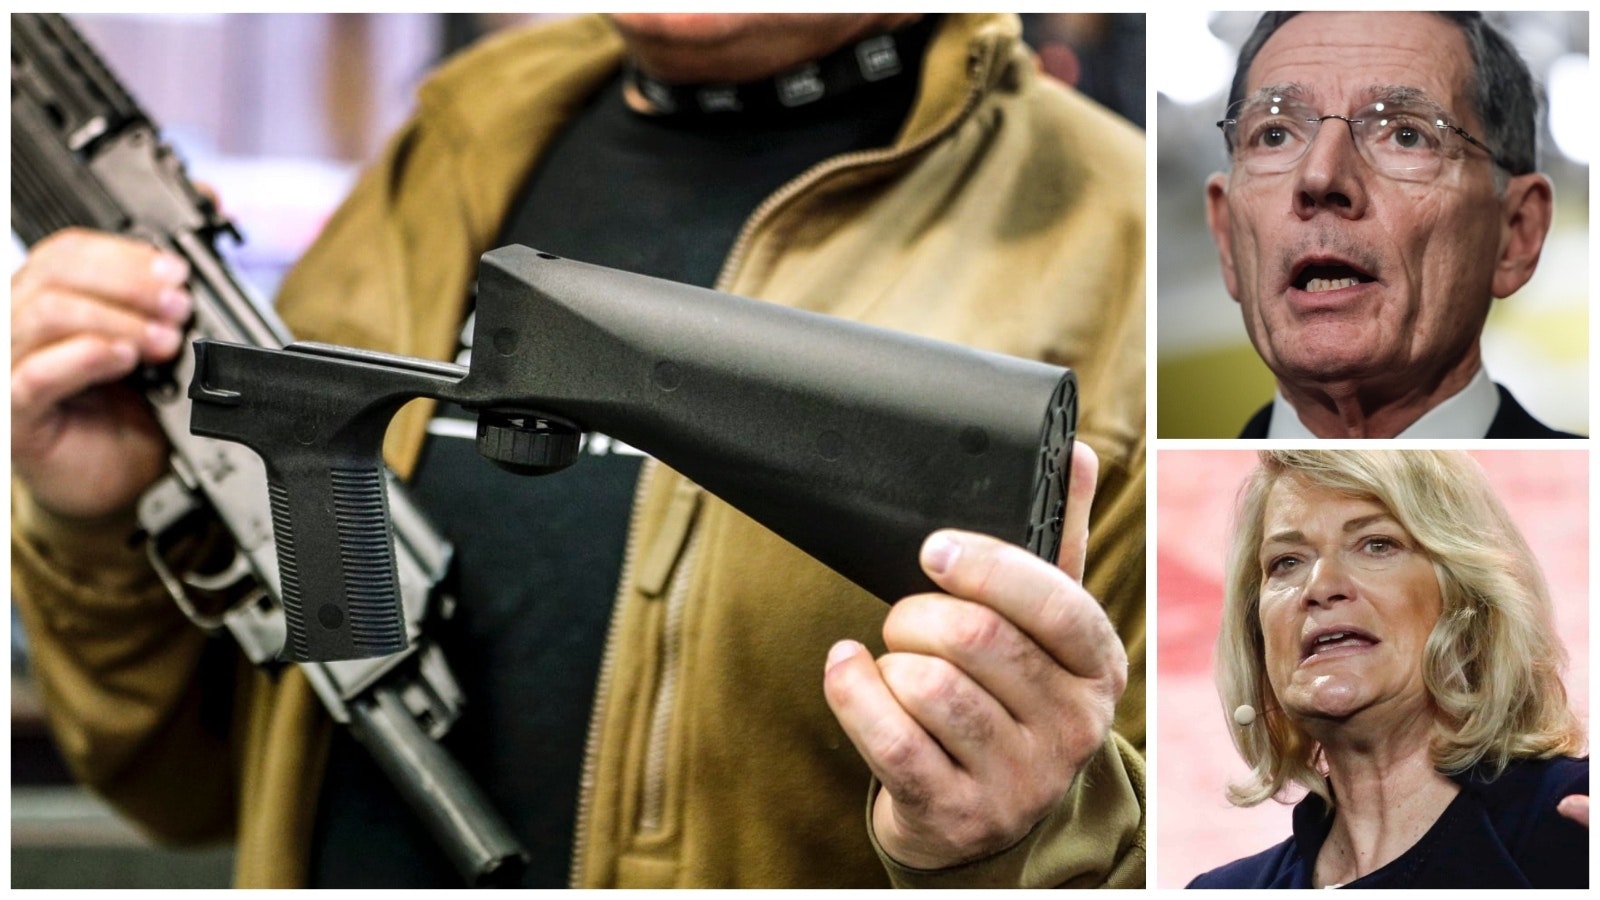 Wyoming U.S. Sens. John Barrasso and Cynthia Lummis have filed a brief with the U.S. Supreme Court arguing that bump stocks don't make weapons automatic.